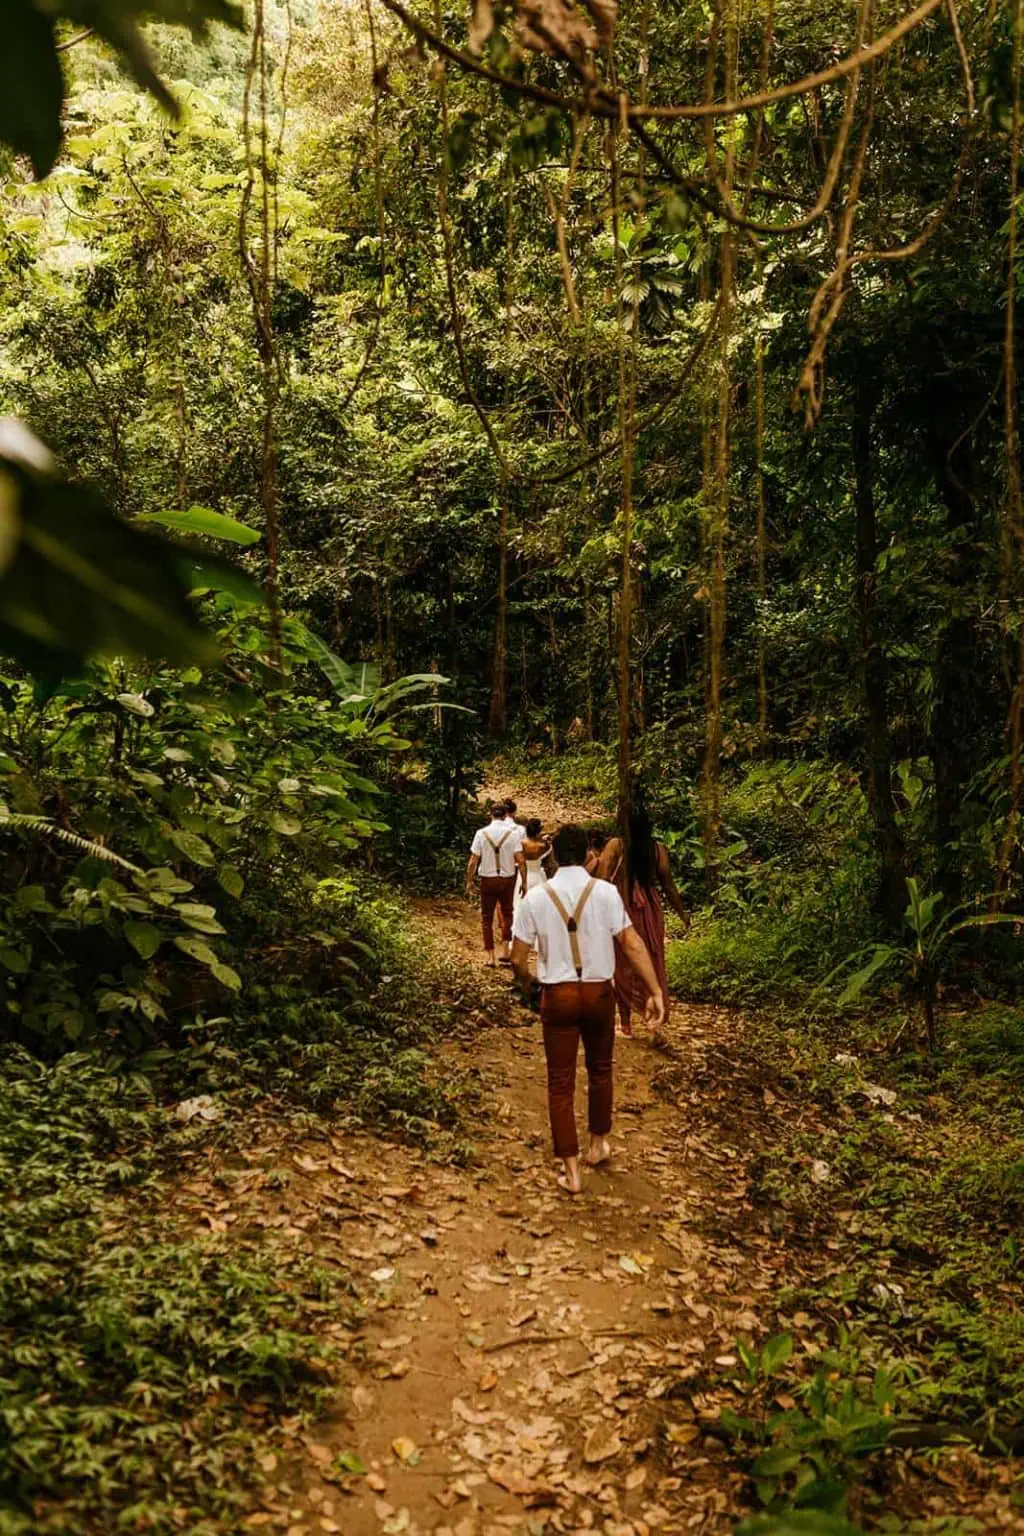 A groom and his groomsmen walk down a path together in the rainforest.